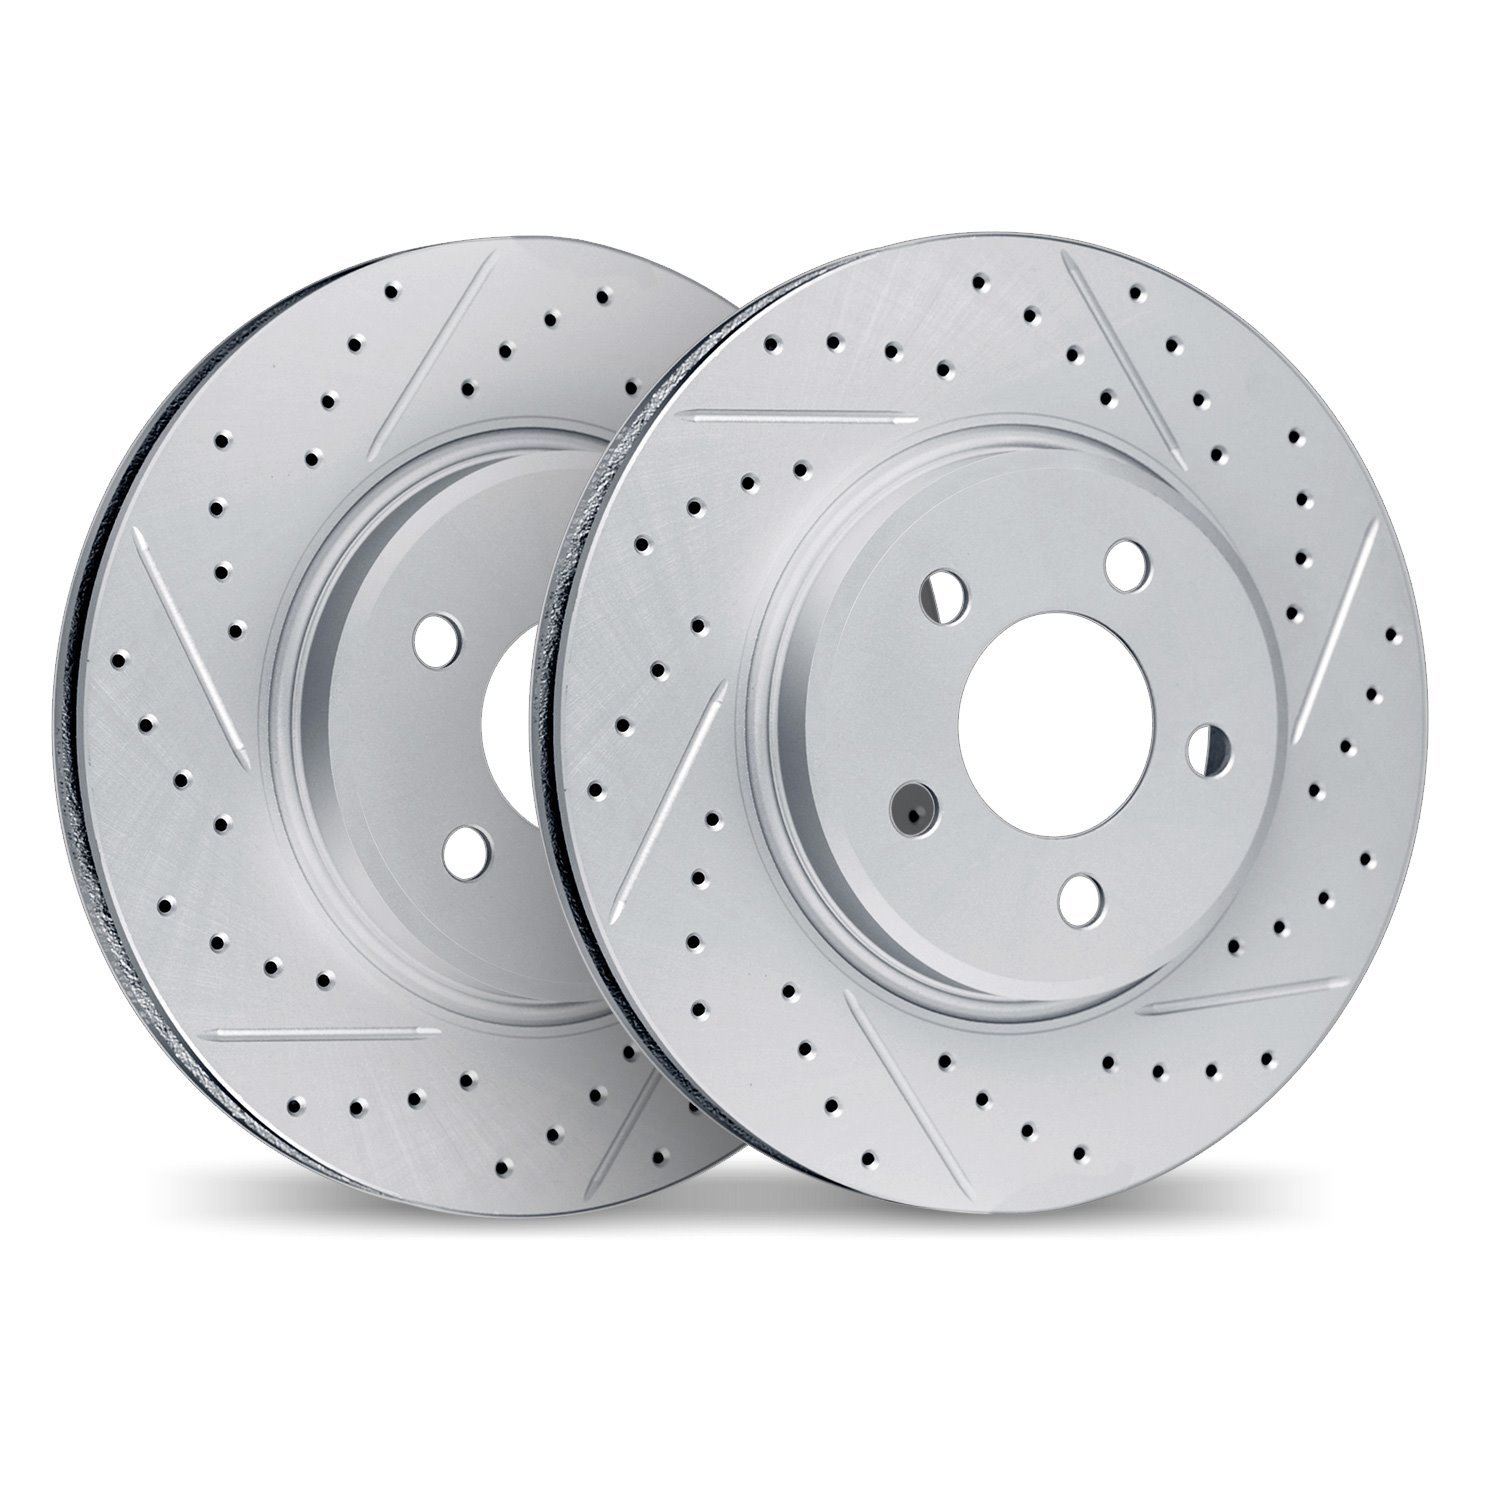 2002-47018 Geoperformance Drilled/Slotted Brake Rotors, 1963-1982 GM, Position: Front